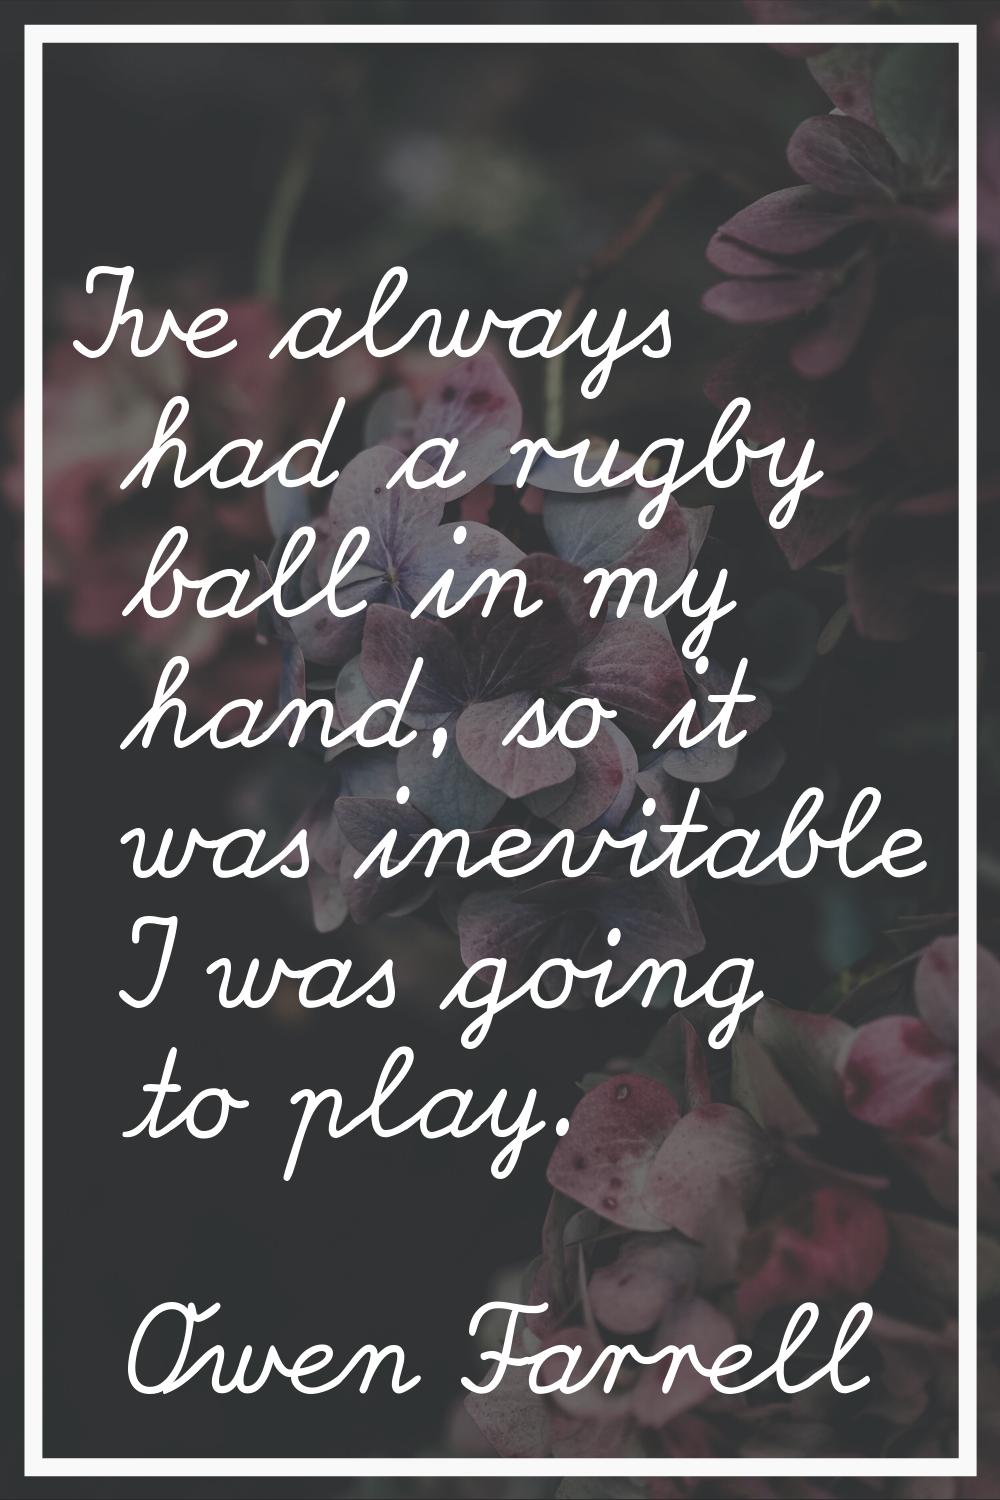 I've always had a rugby ball in my hand, so it was inevitable I was going to play.